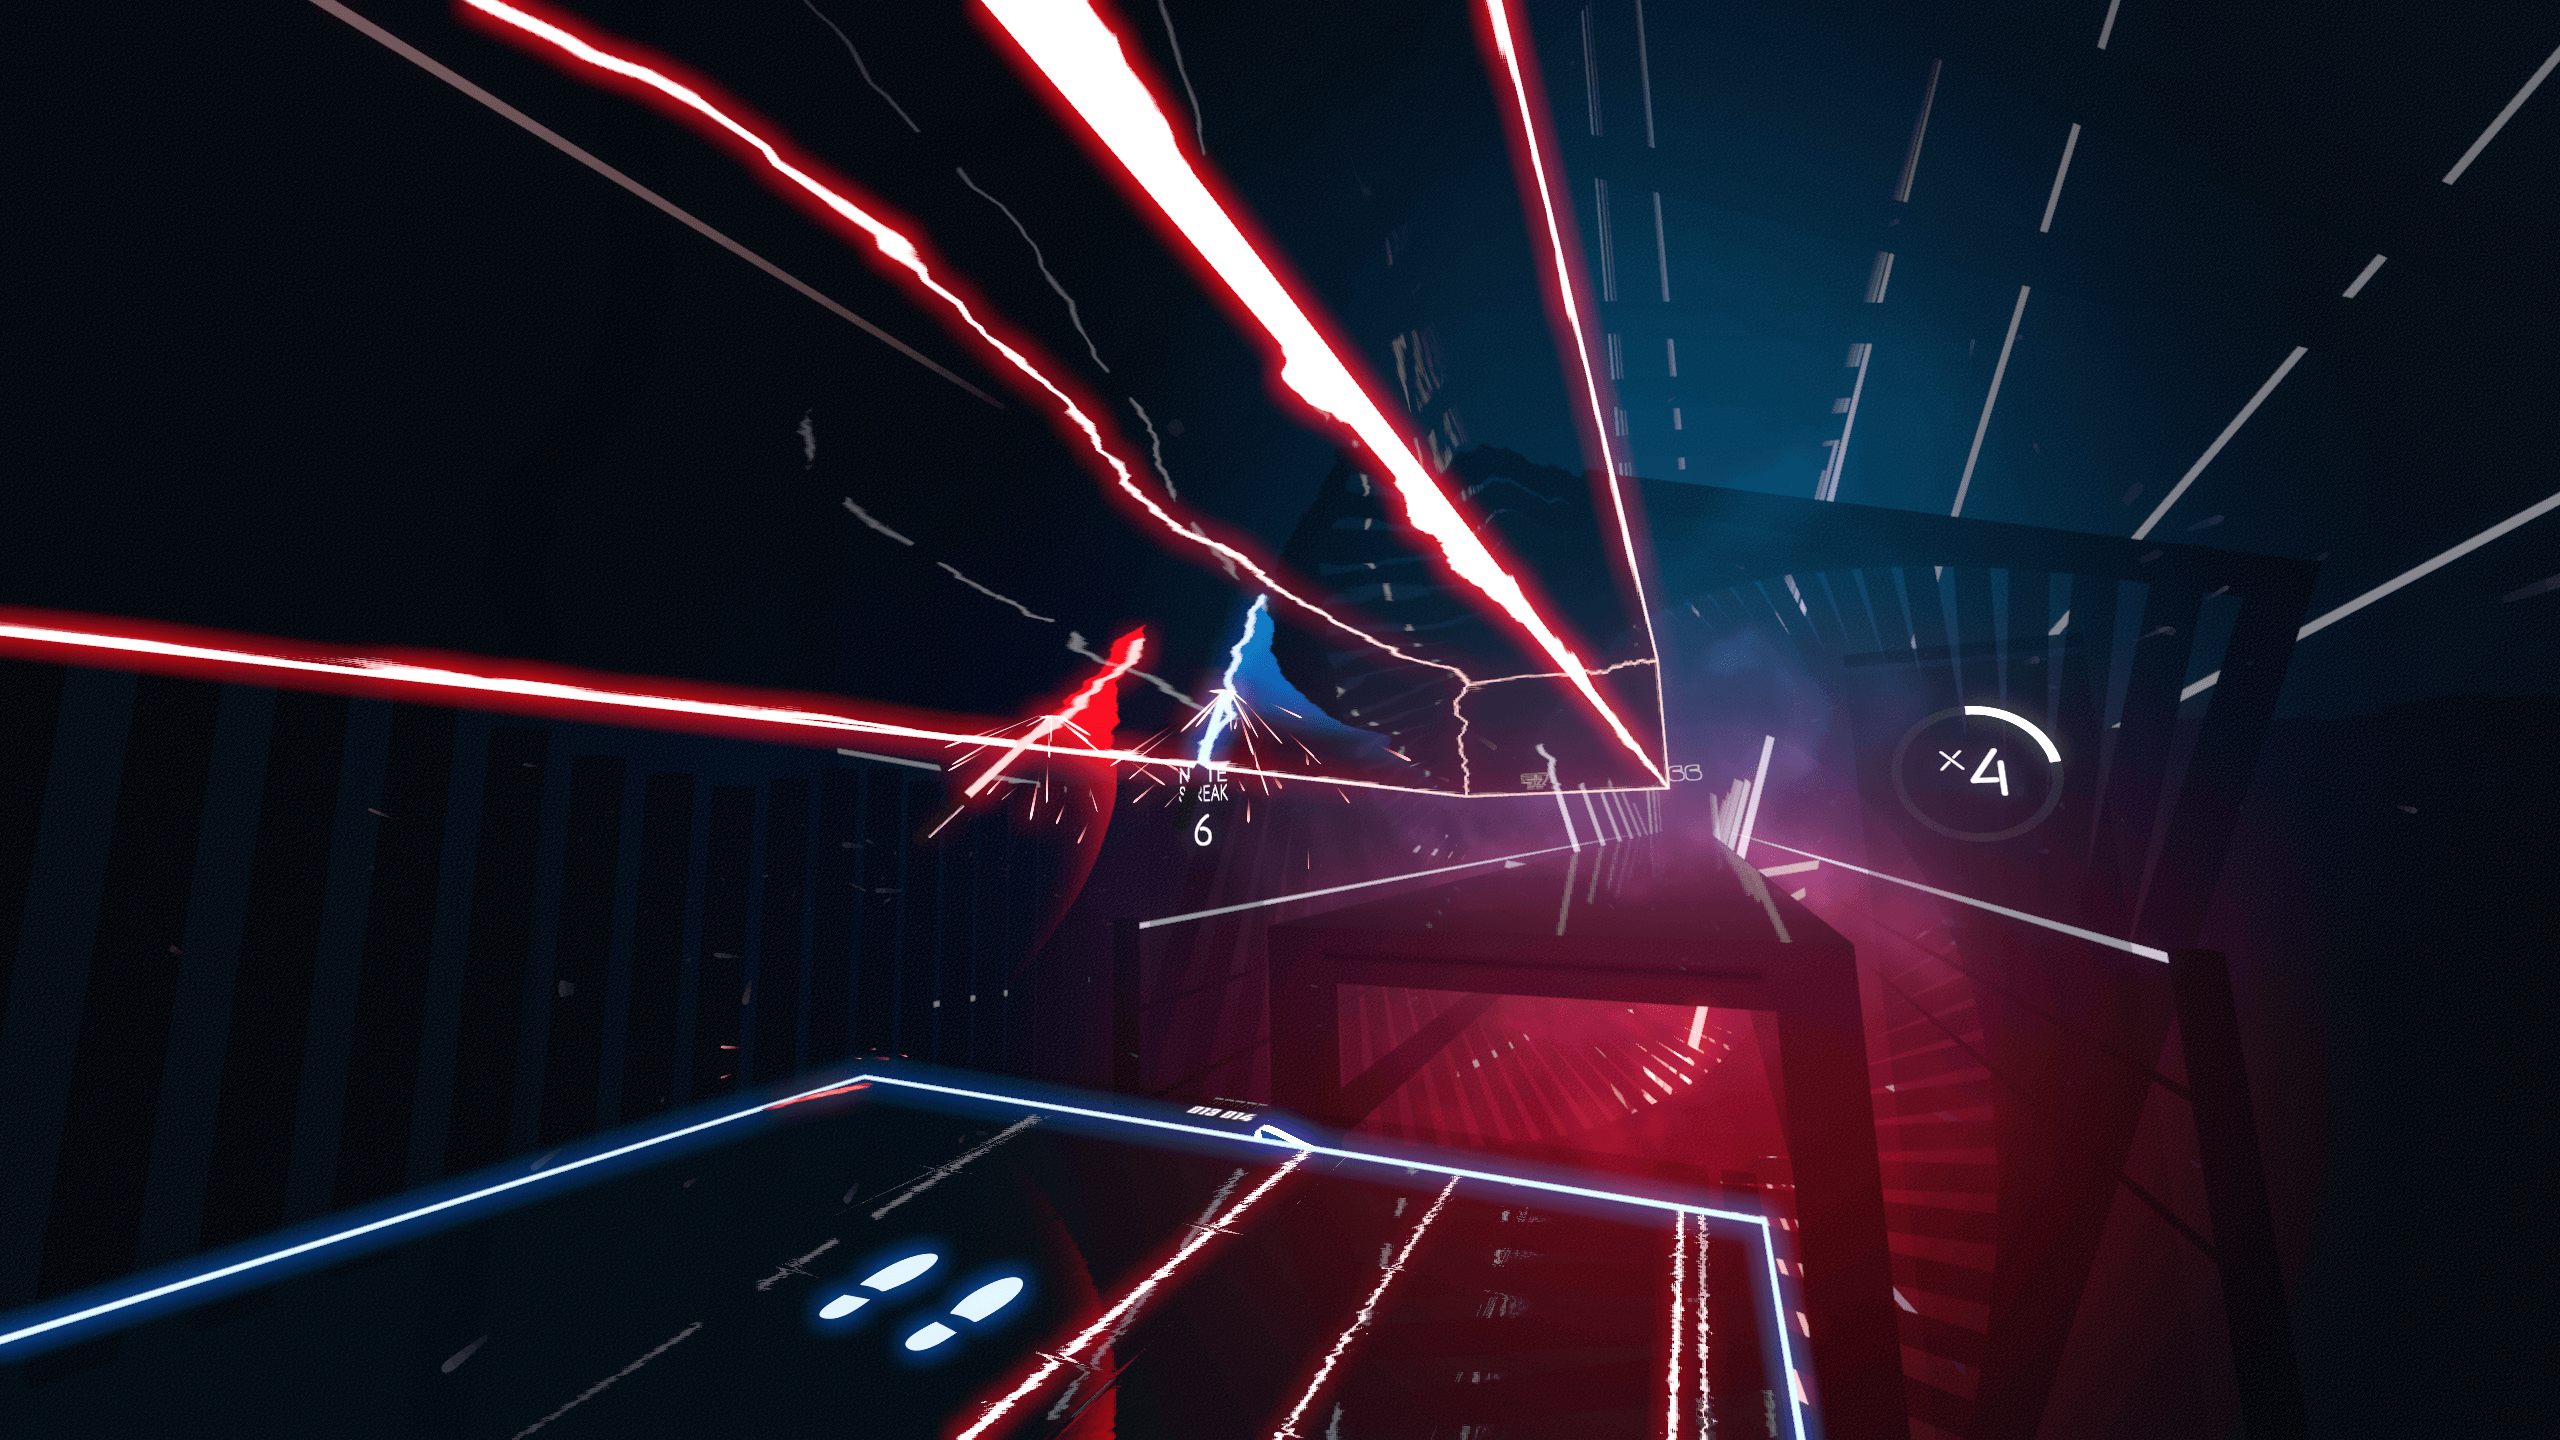 Beat Saber Wallpapers Wallpaper Cave Find the best saber wallpaper on wallpapertag. beat saber wallpapers wallpaper cave